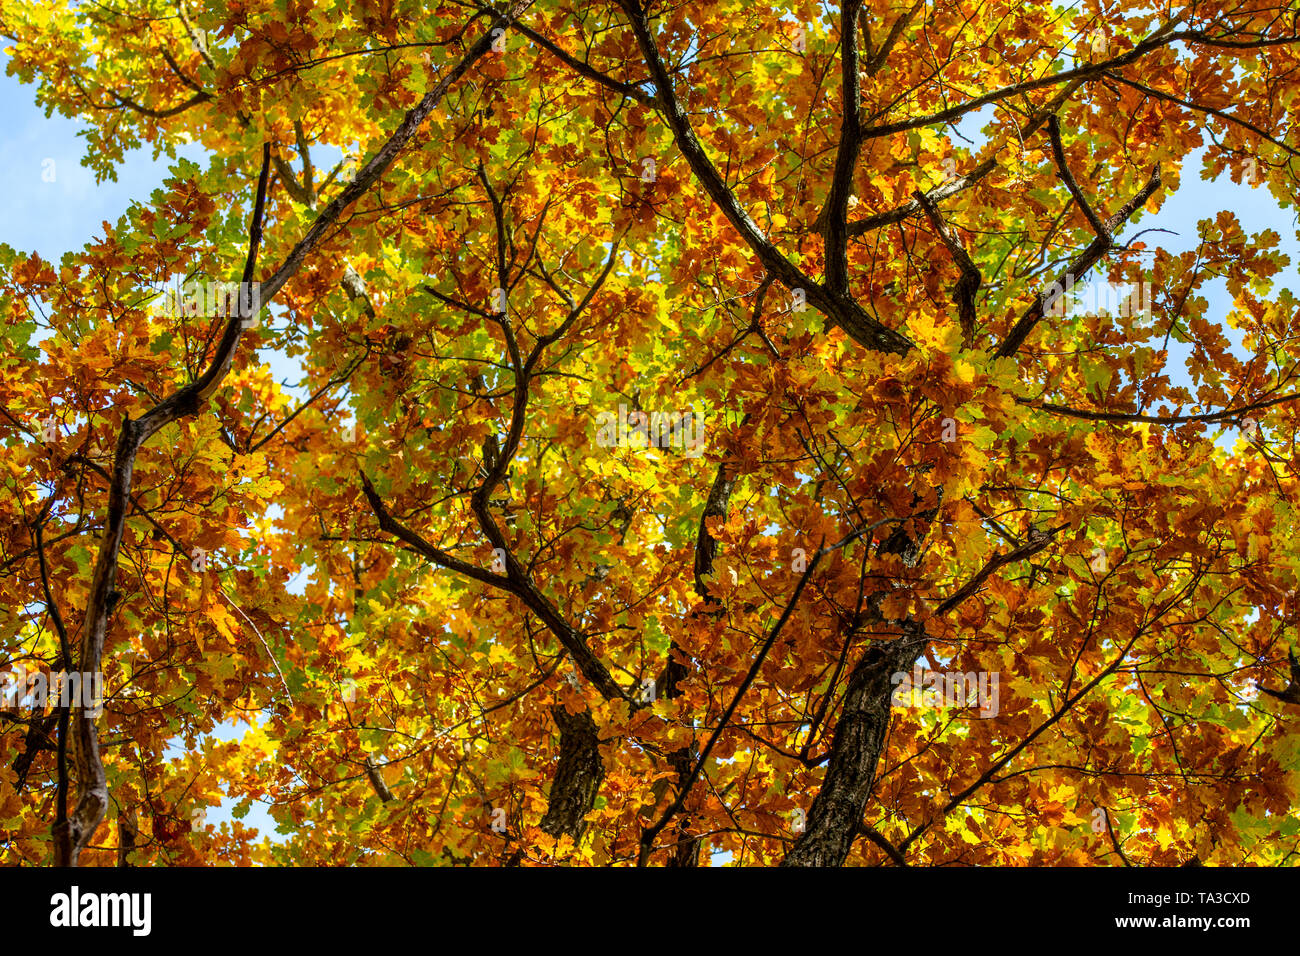 An upward shot of an oak tree with various fall colored leaves and some branches. Stock Photo